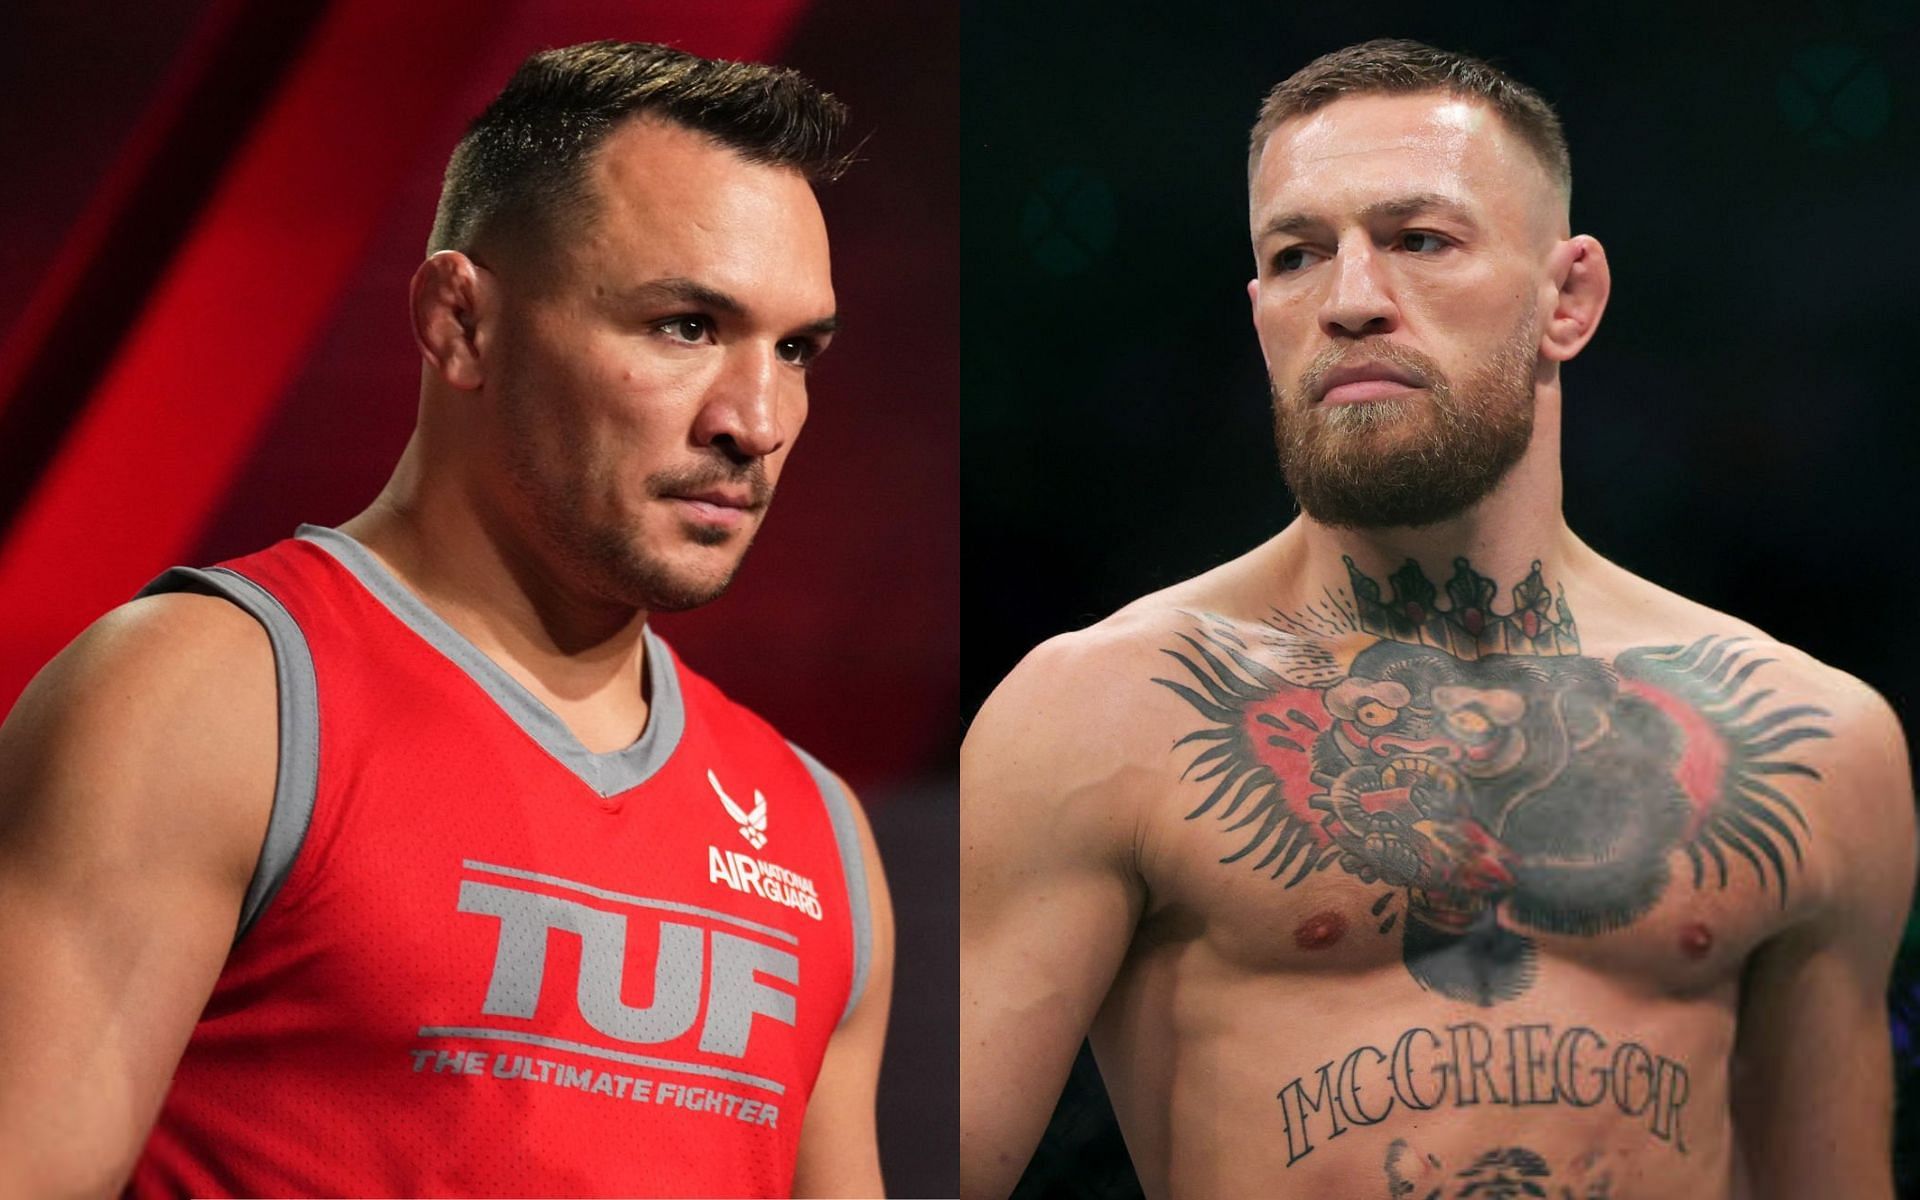 Michael Chandler (left) sets sights on a former UFC star and reveals potential bout with Conor McGregor (right) is unclear [Images Courtesy: @GettyImages]